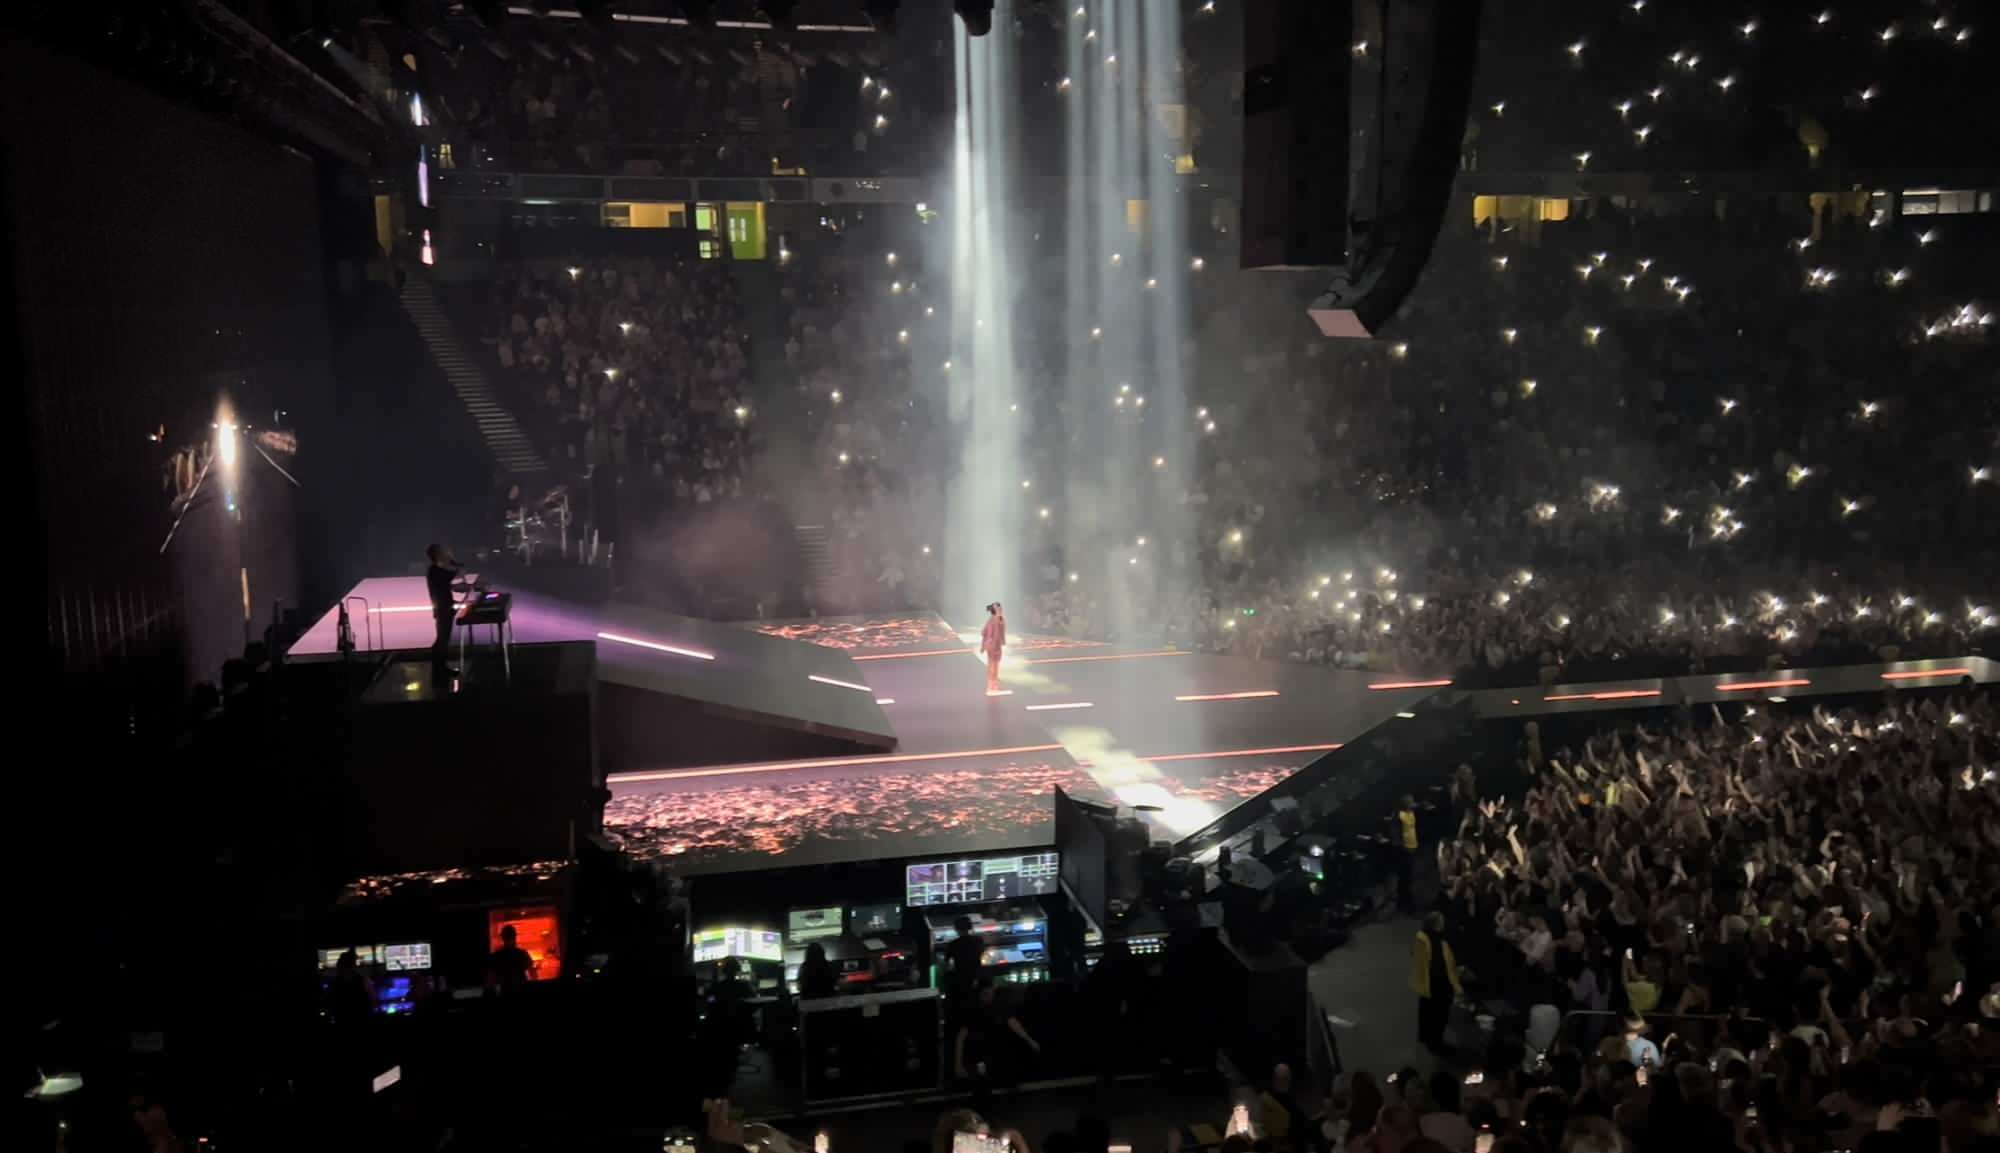 View of Billie Eilish Happier Than Ever World Tour at Manchester Arena from Seat Block 101